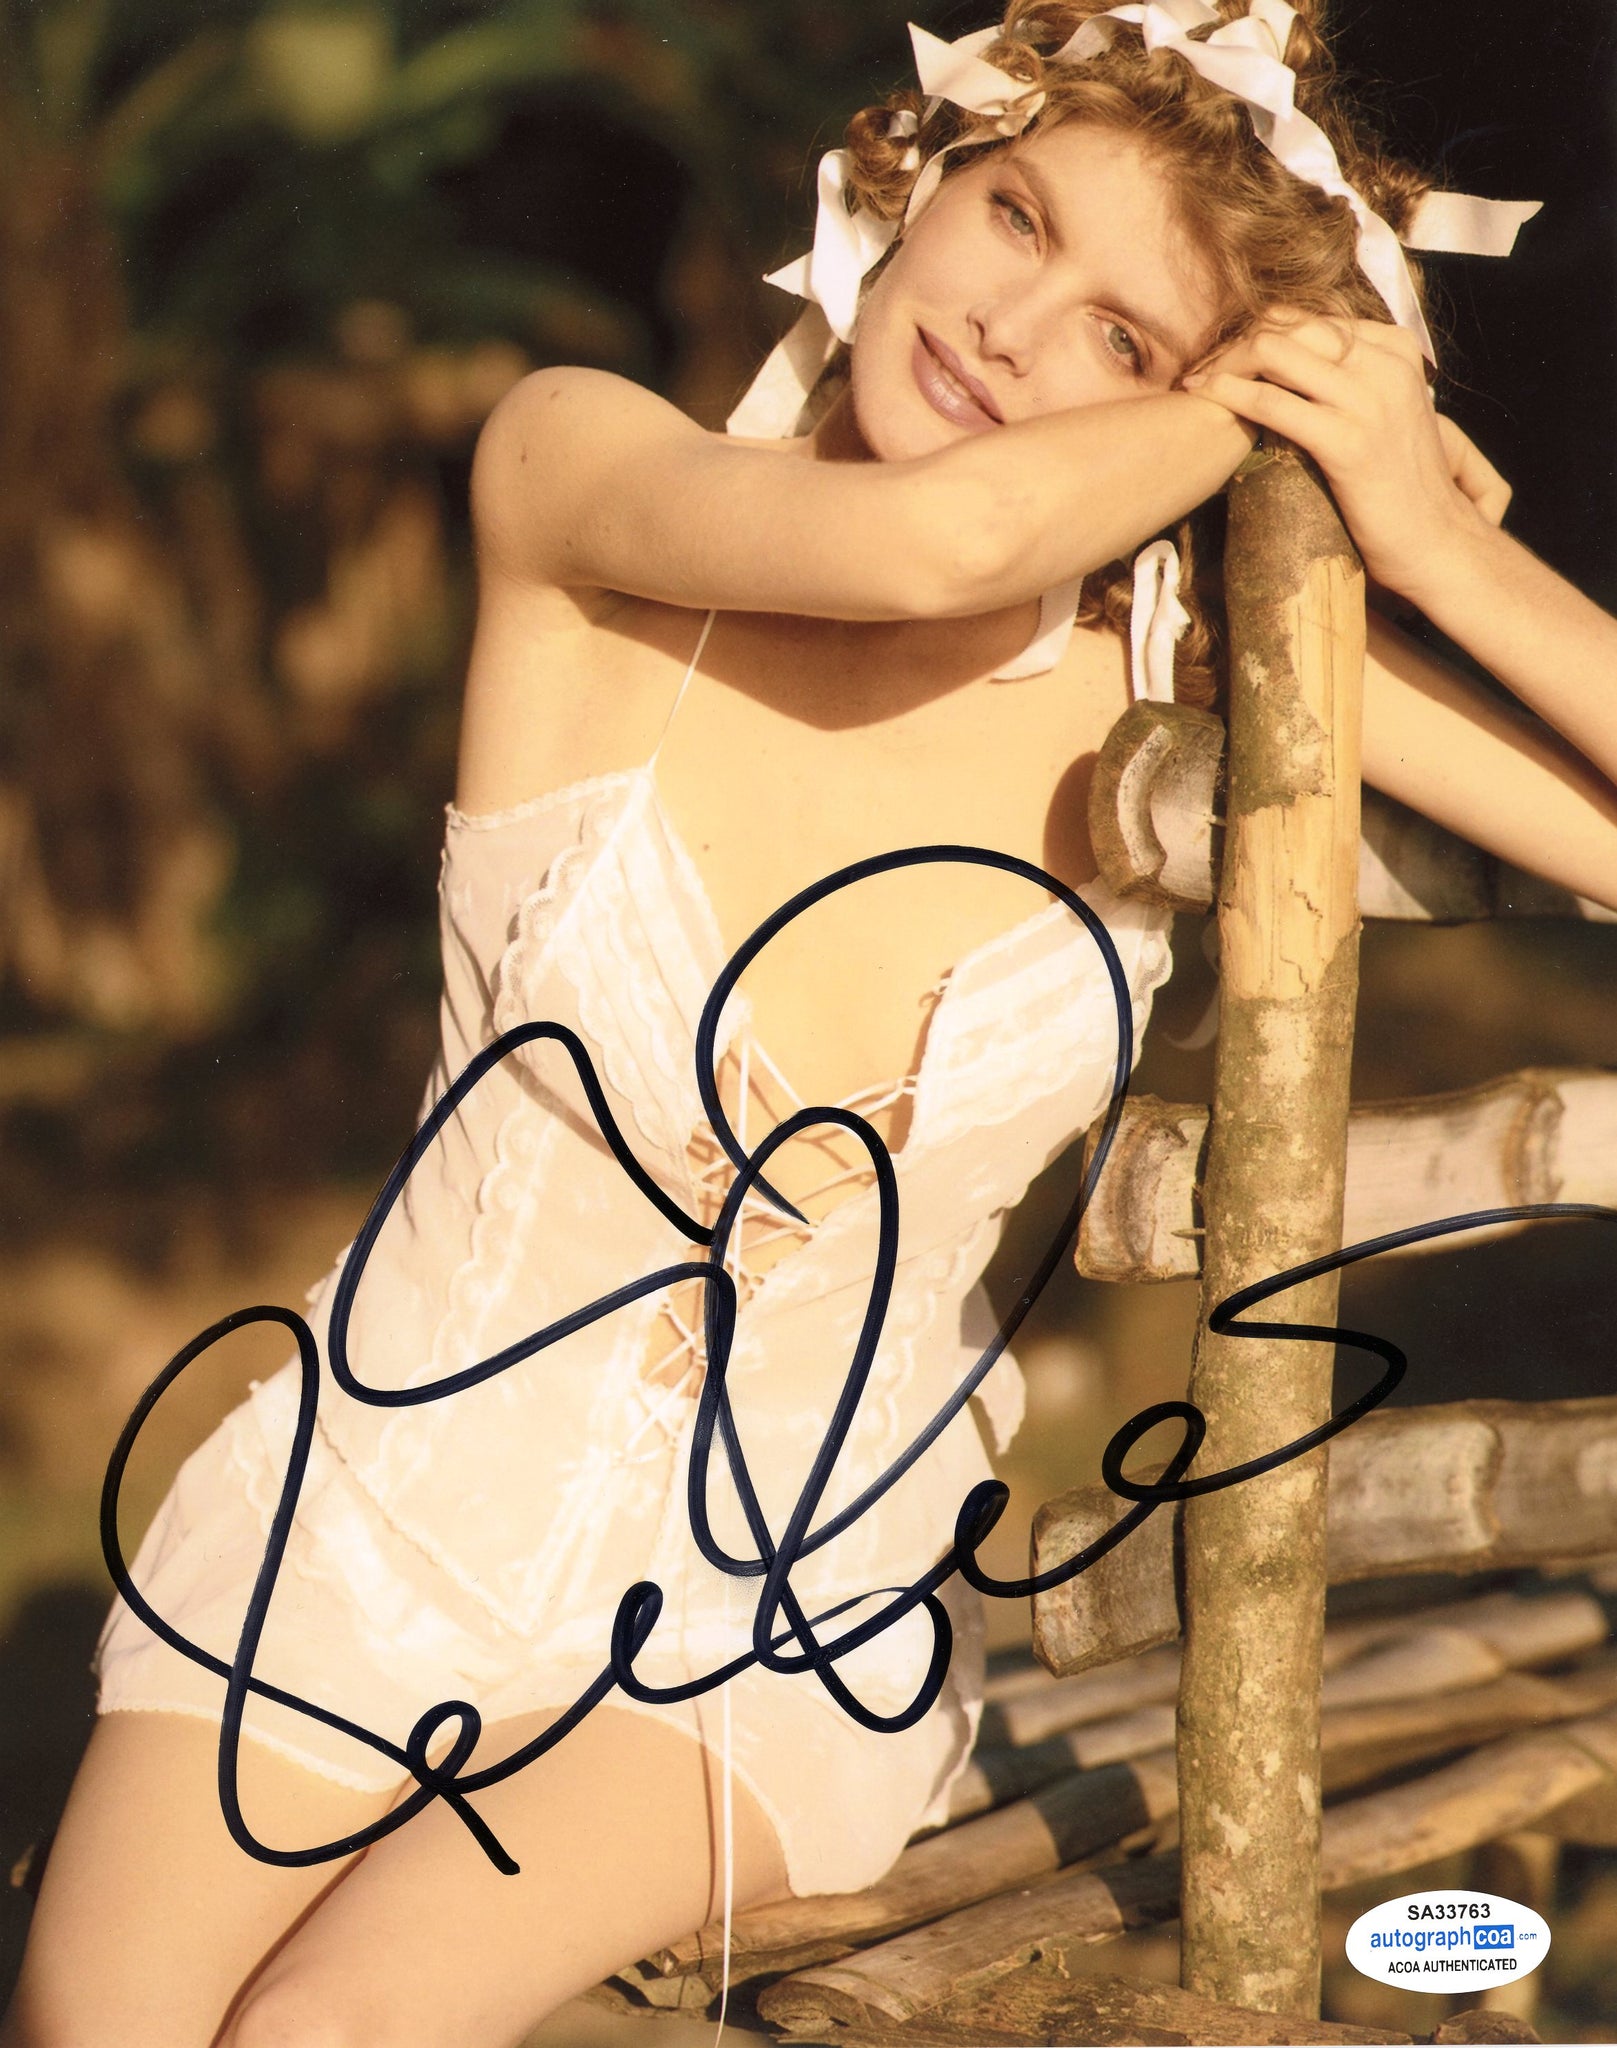 Rene Russo Sexy Signed Autograph 8x10 Photo ACOA #3 - Outlaw Hobbies Authentic Autographs